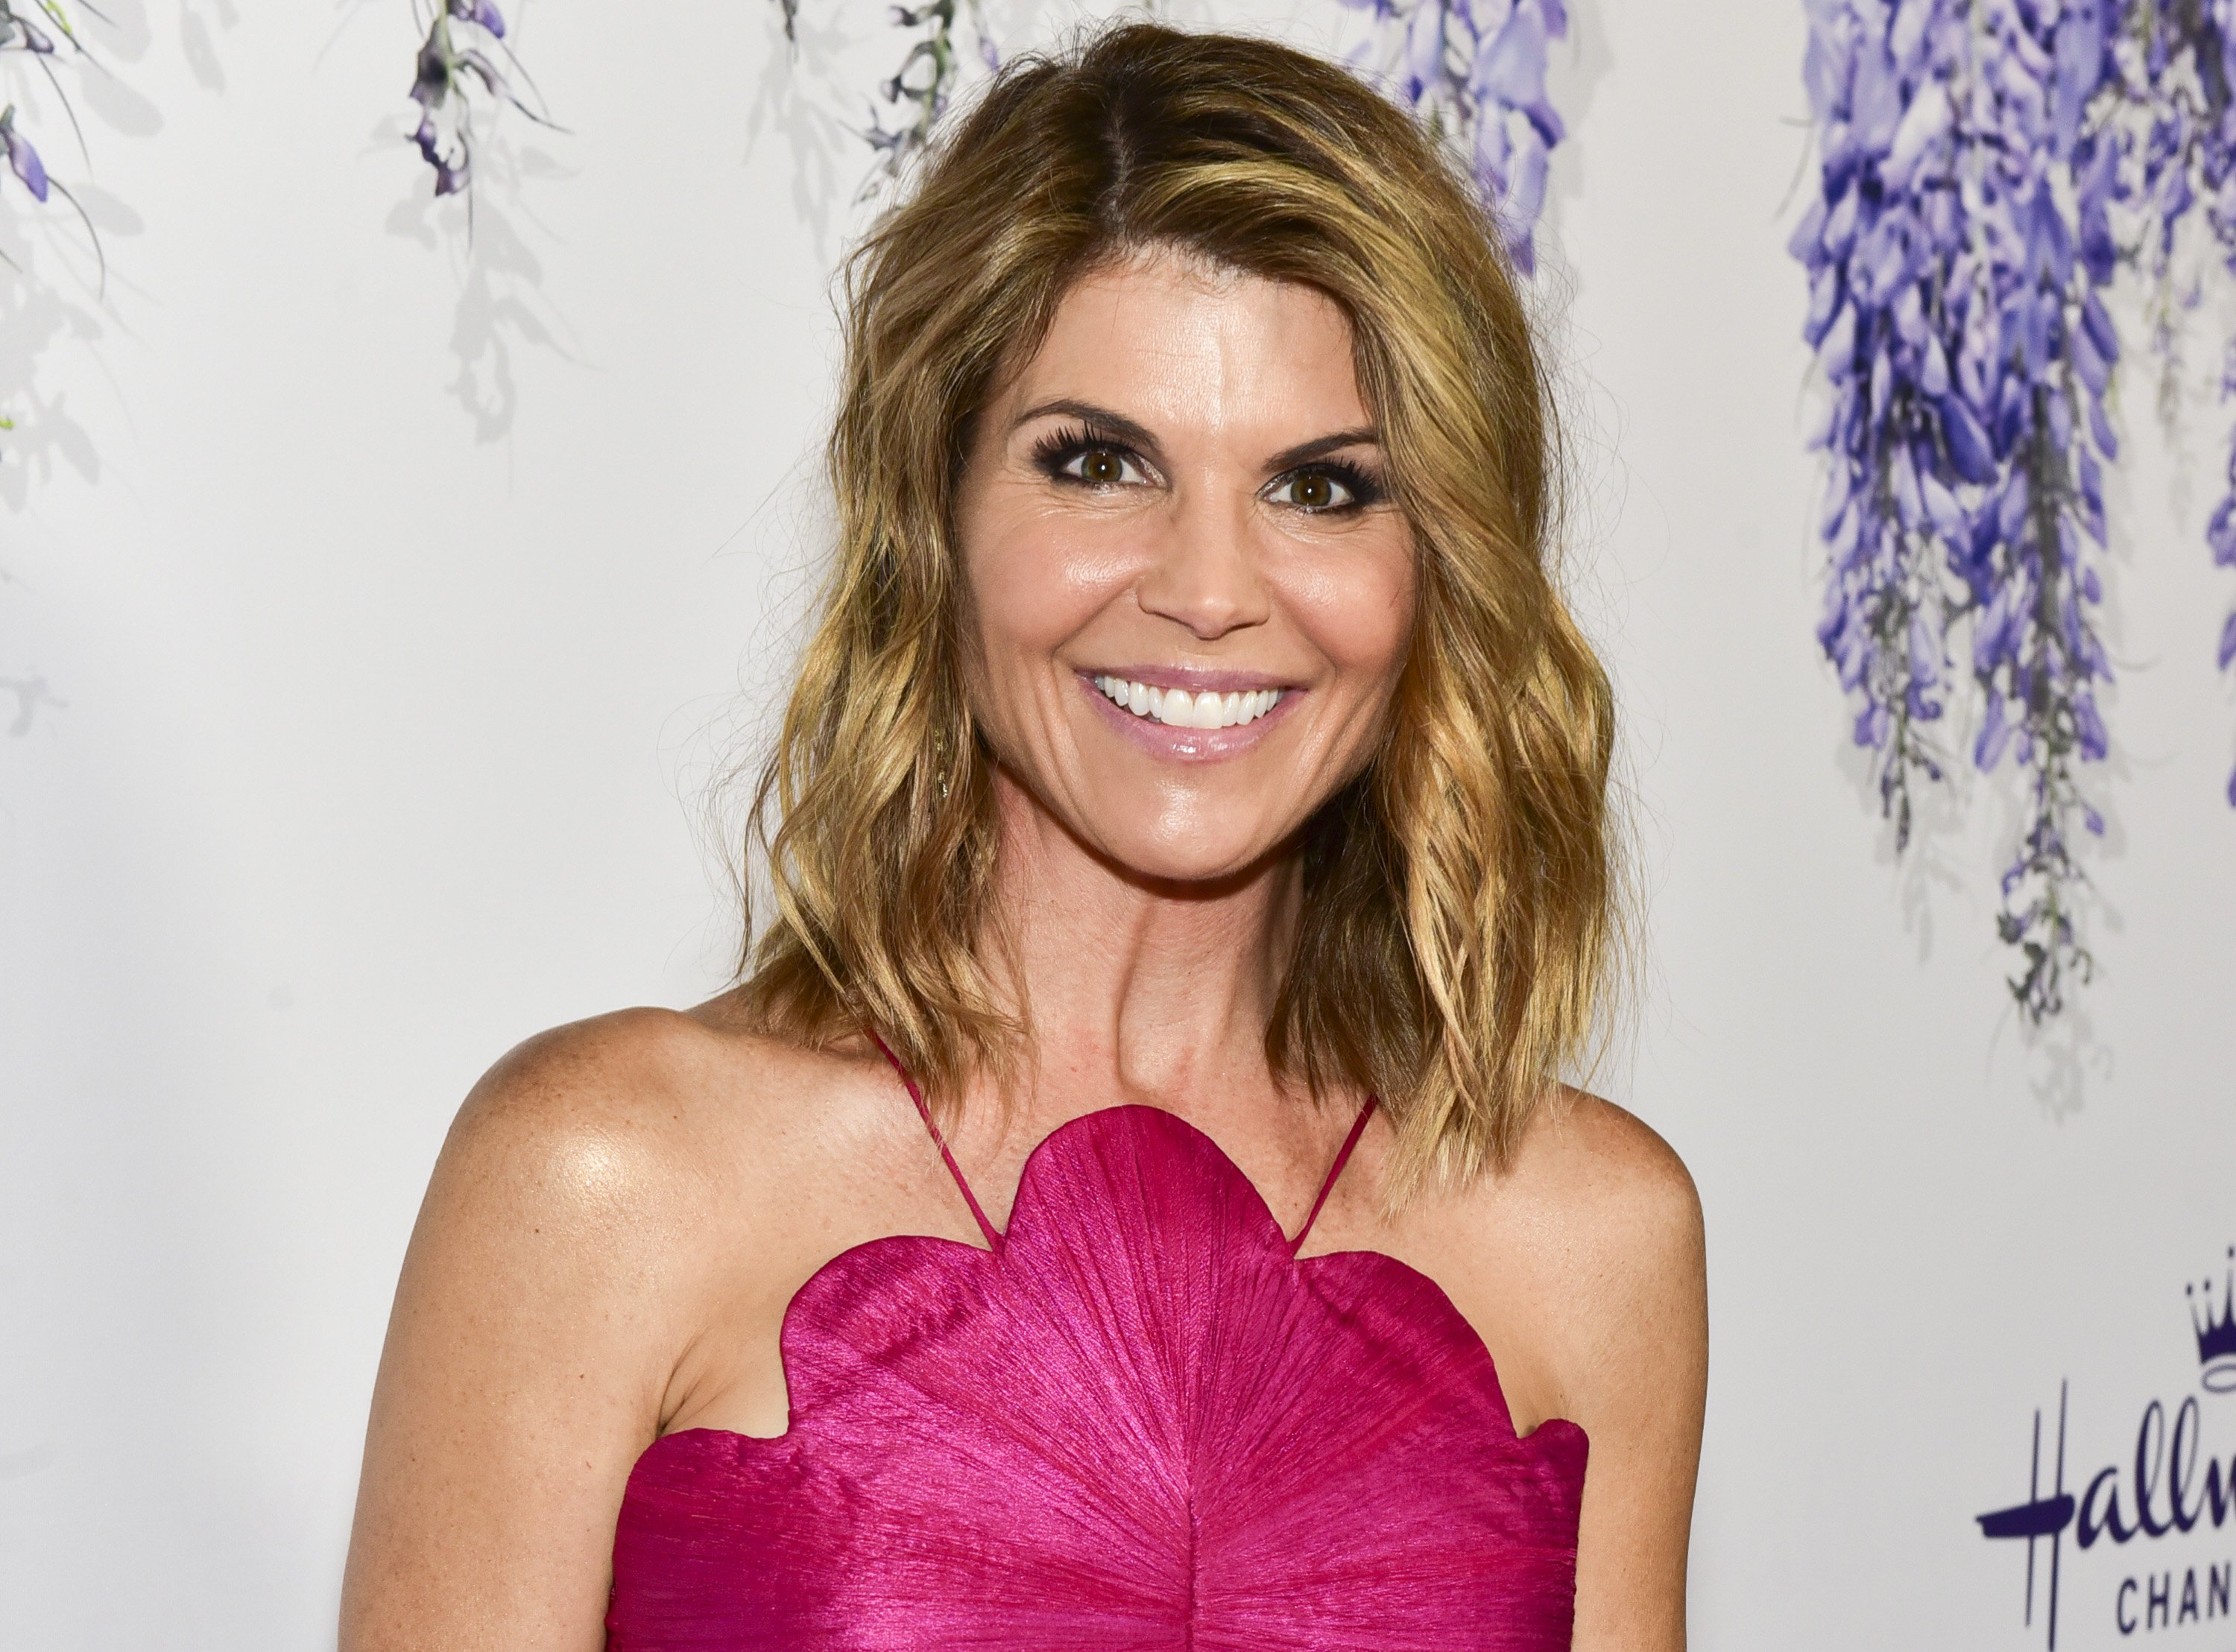 Lori Loughlin at the 2018 Hallmark Channel Summer TCA | Photo: Getty Images